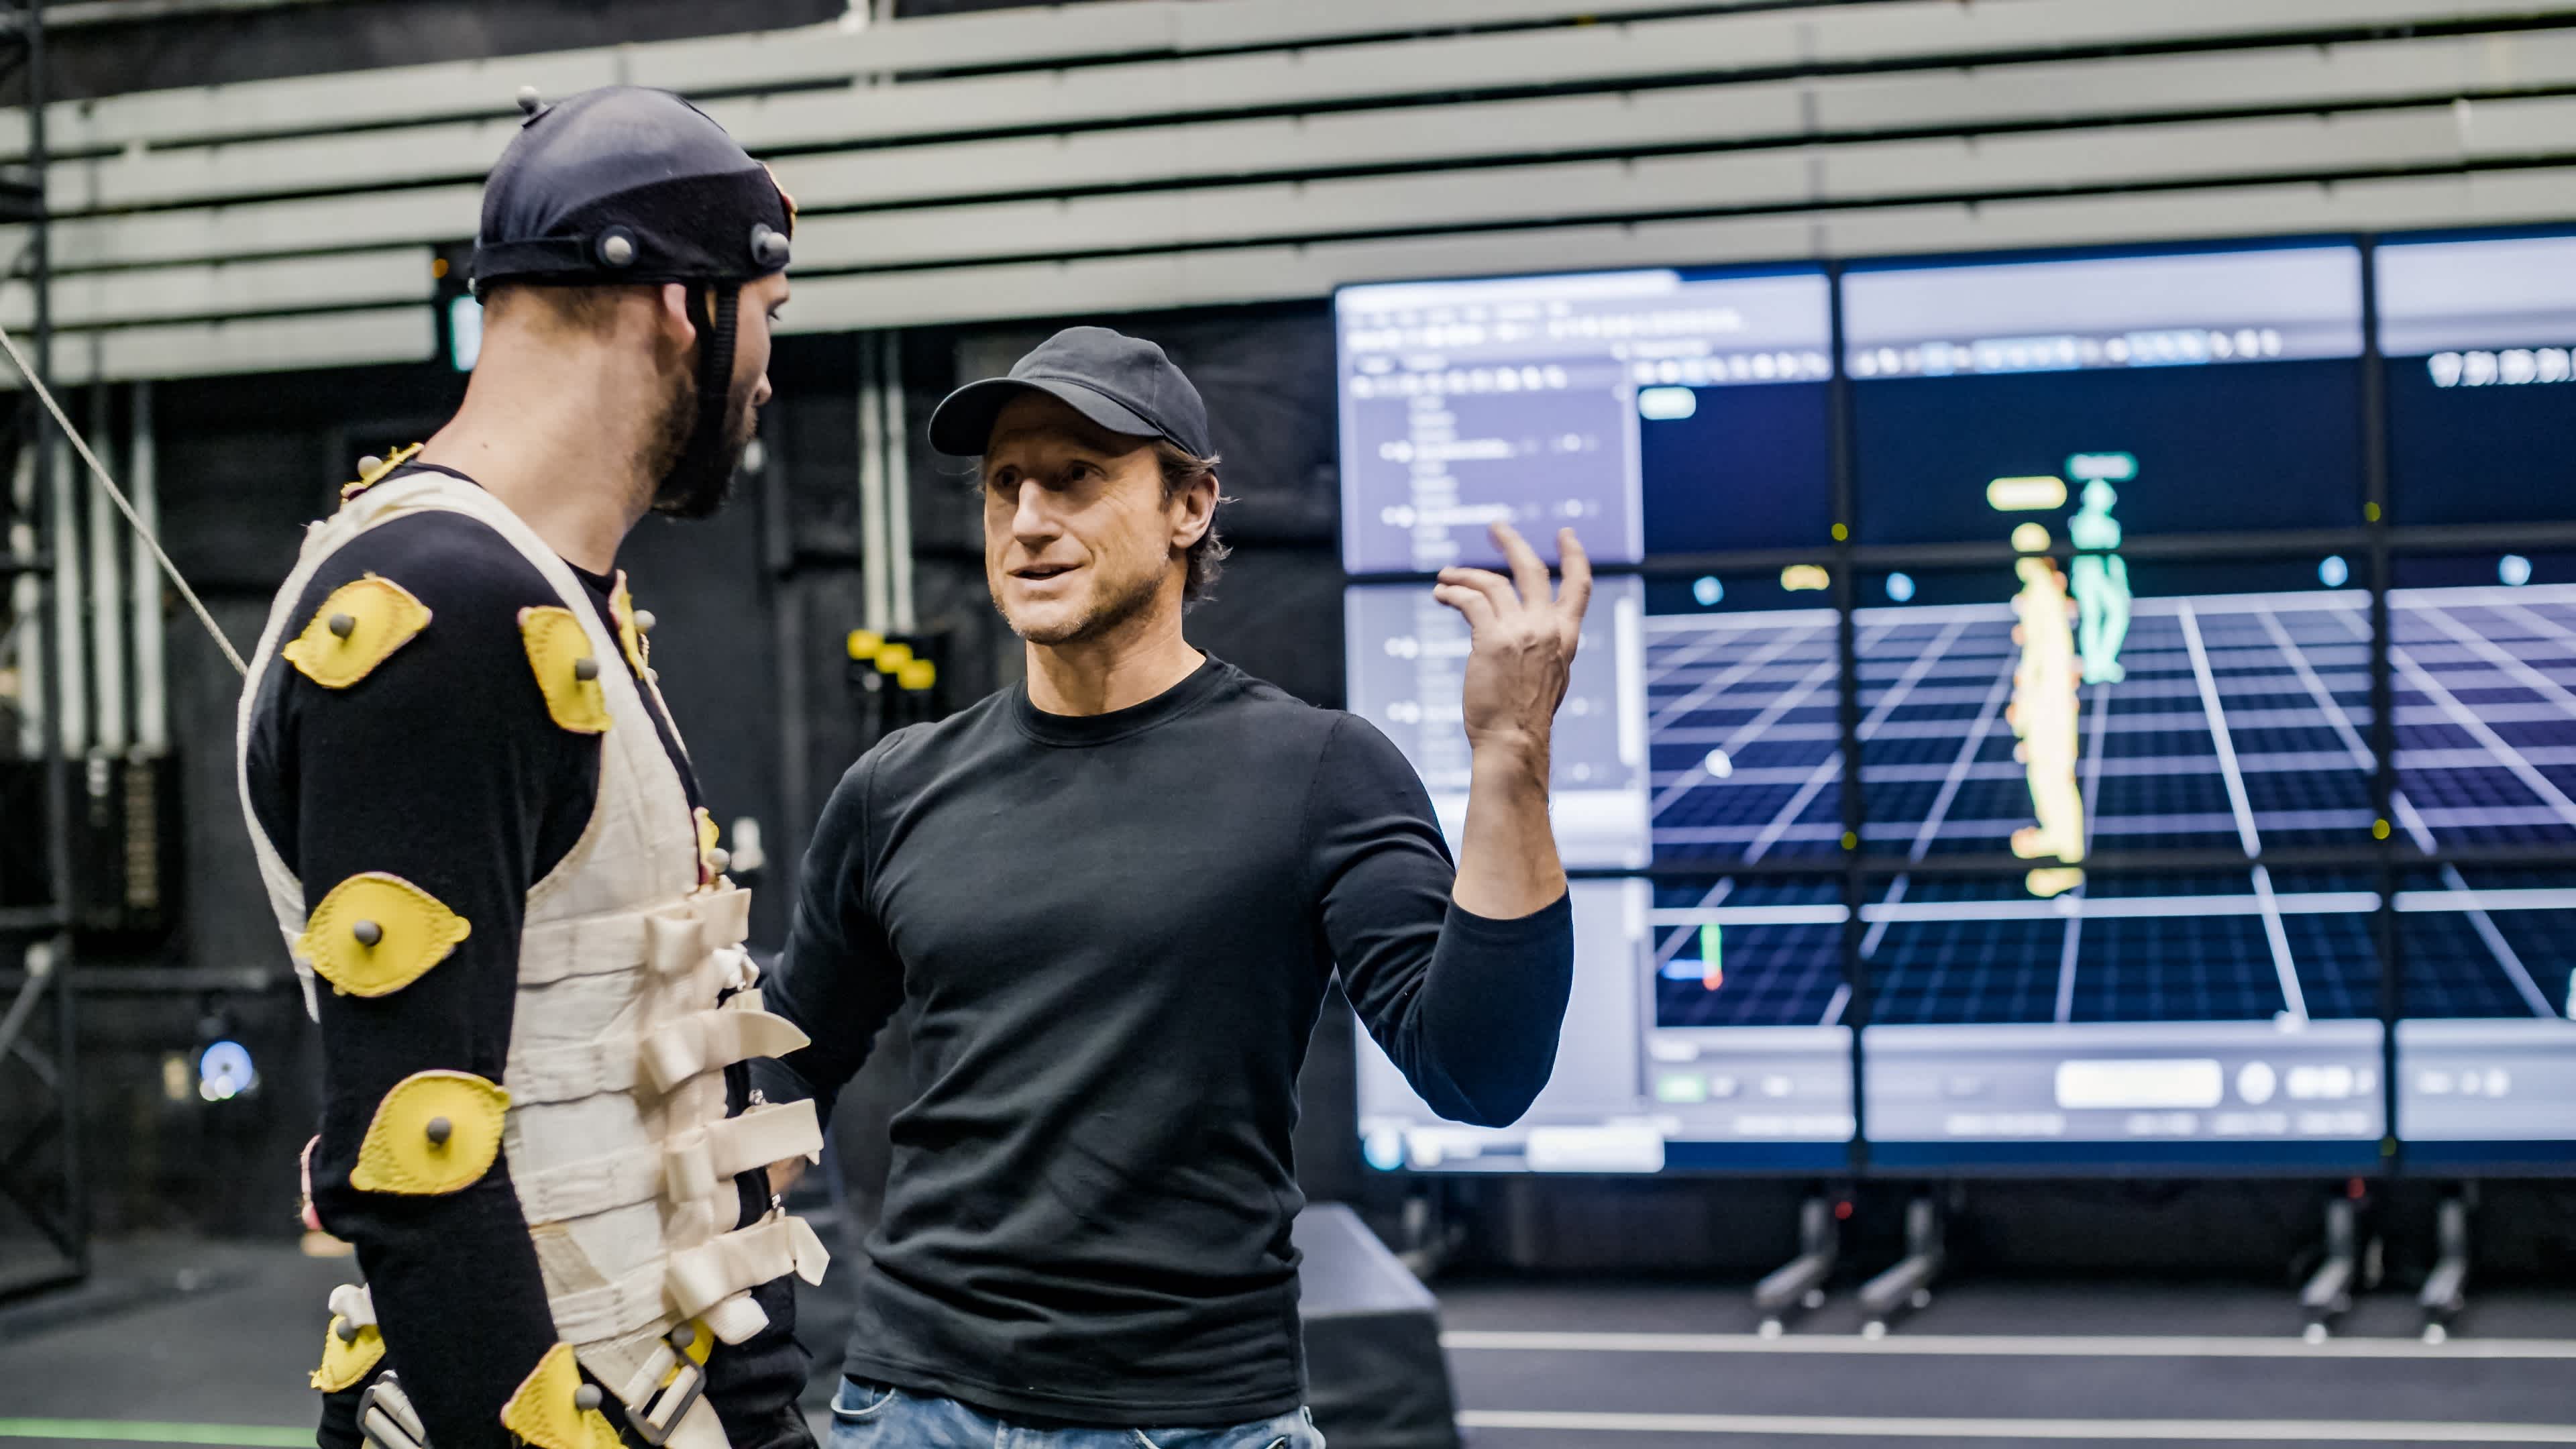 Director on motion capture set giving explaining something to an actor. 